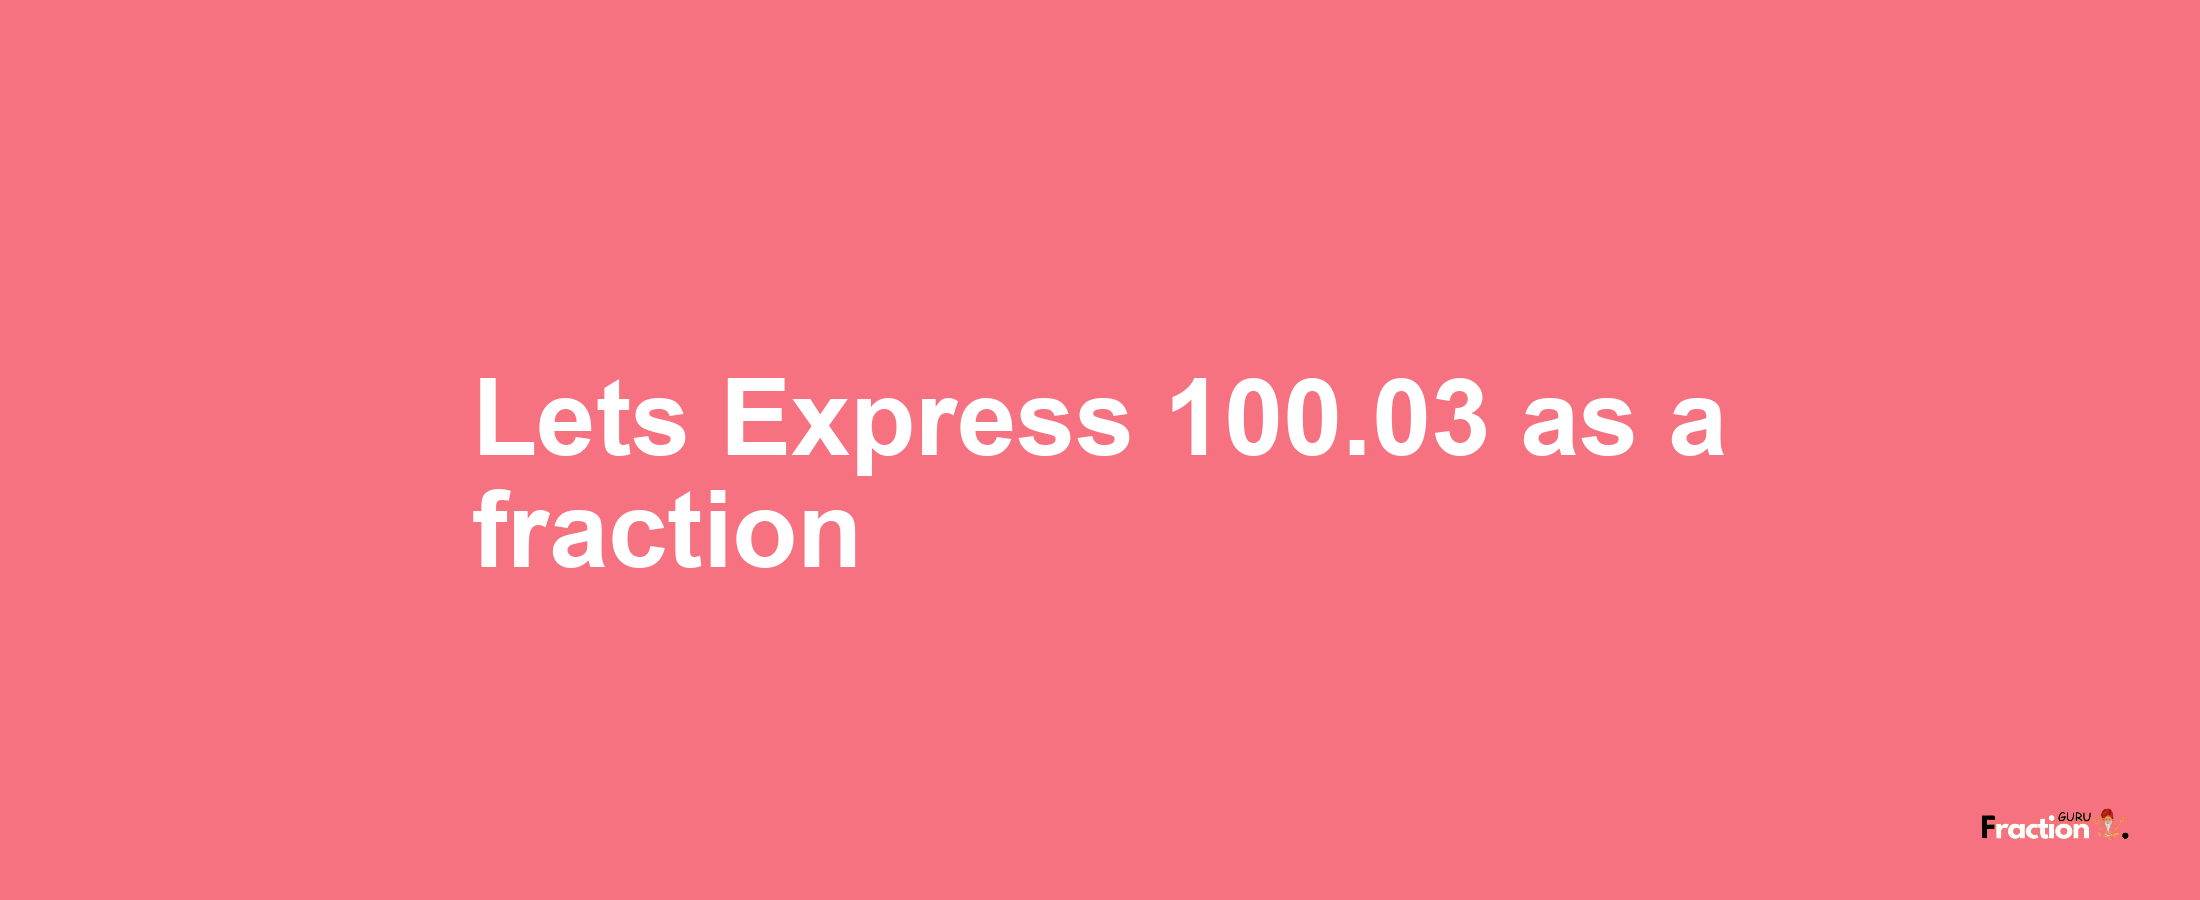 Lets Express 100.03 as afraction